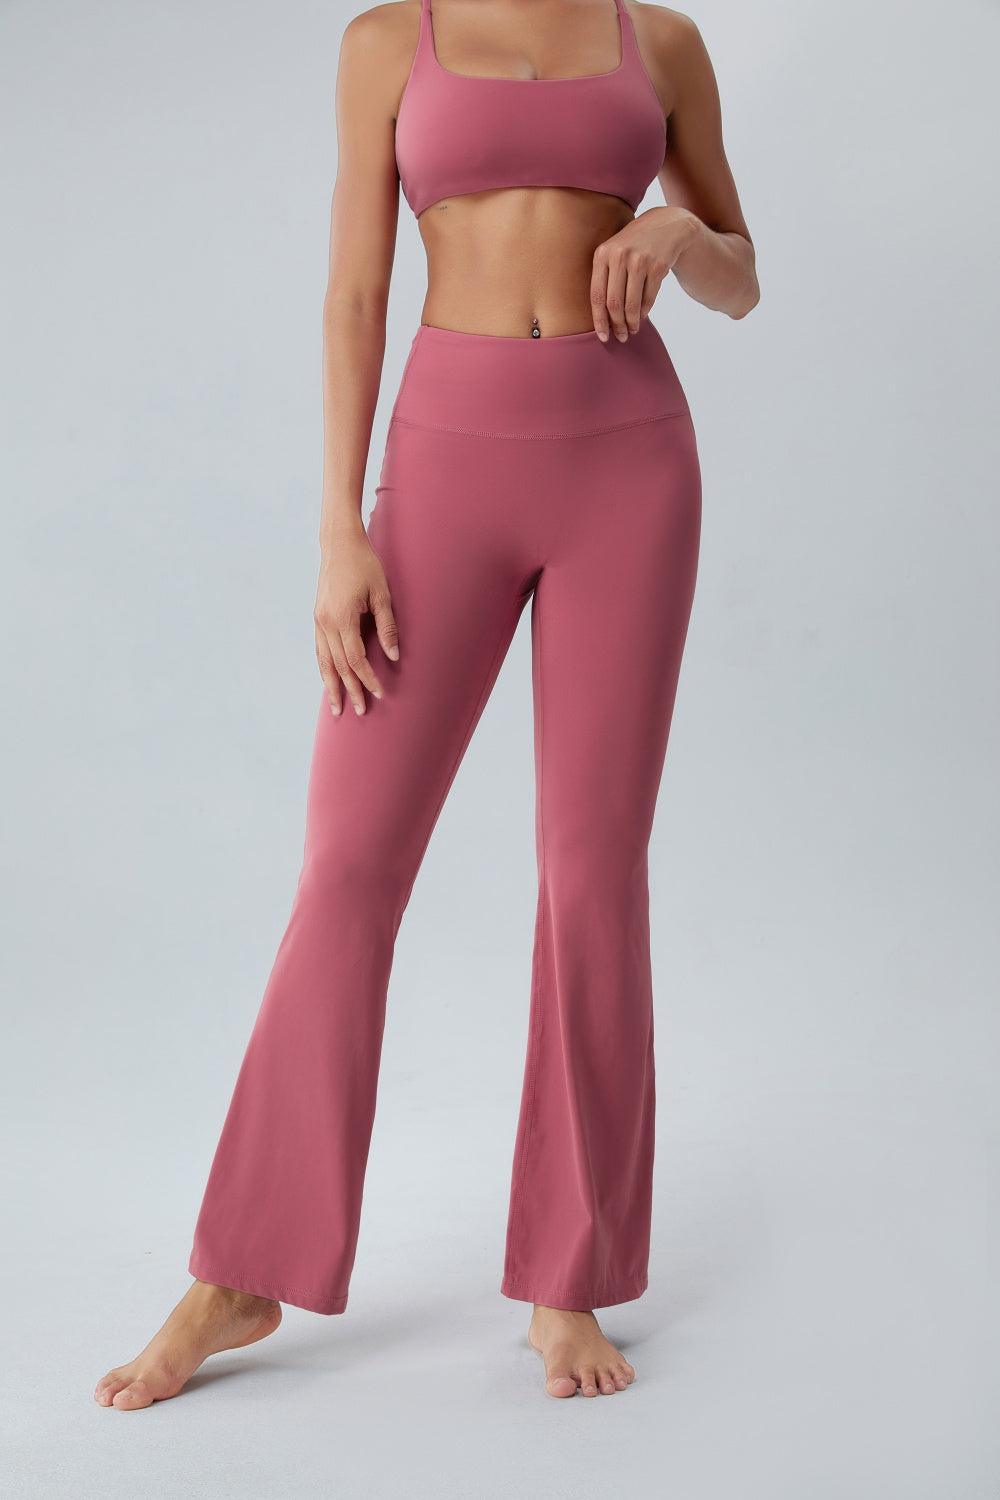 a woman in a pink sports bra top and wide legged pants